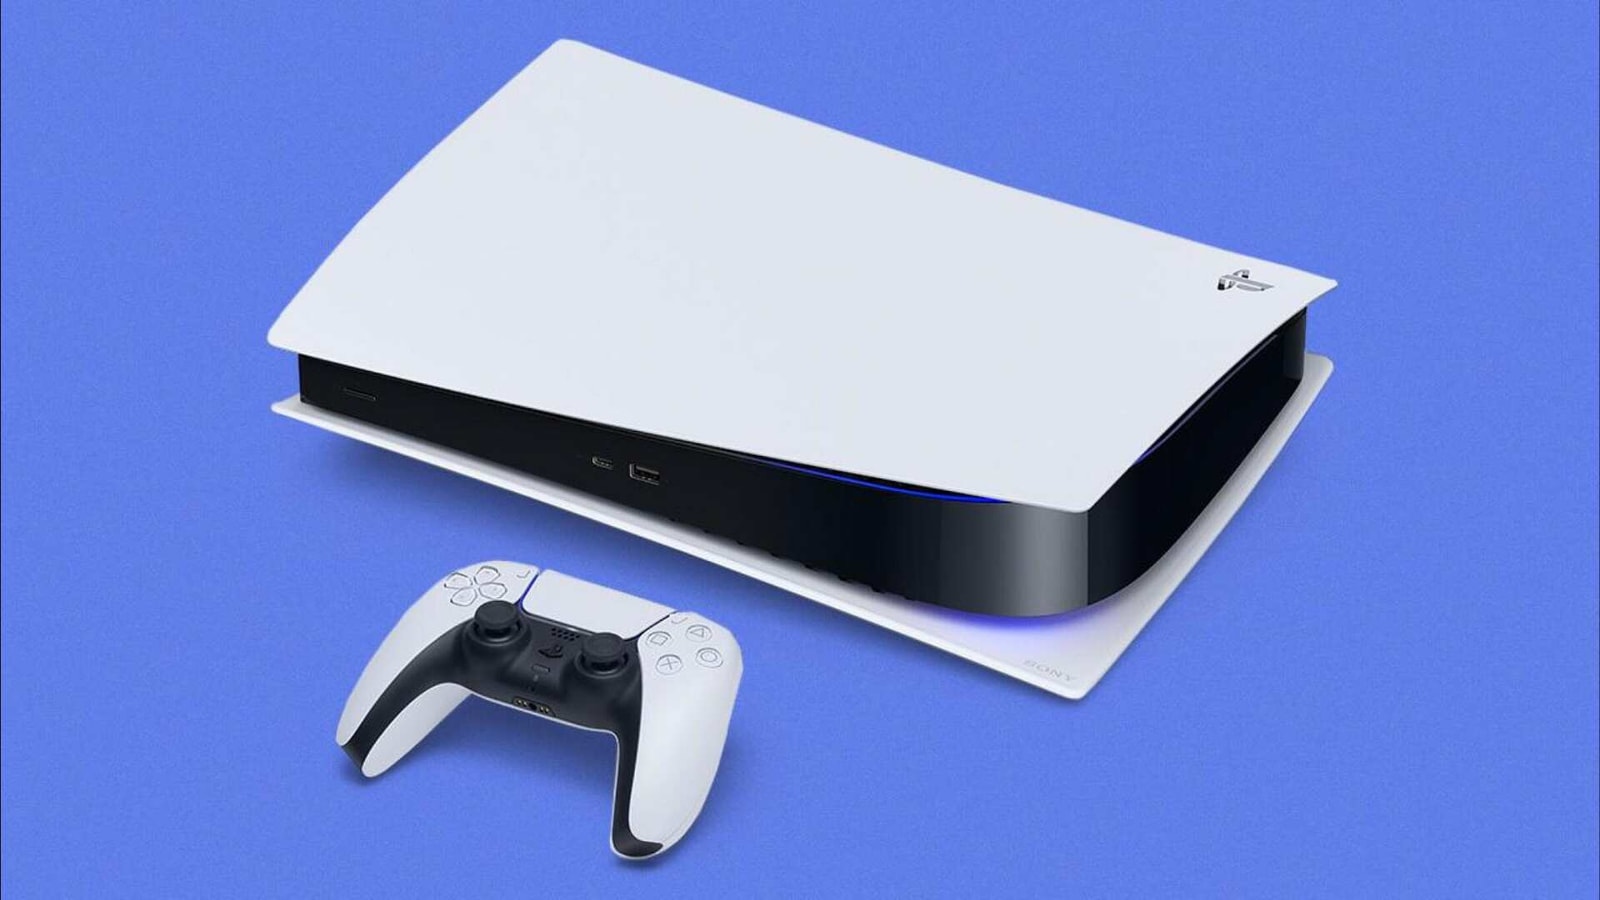 PS5 price 'revealed' as £449 – but 'all digital' edition could